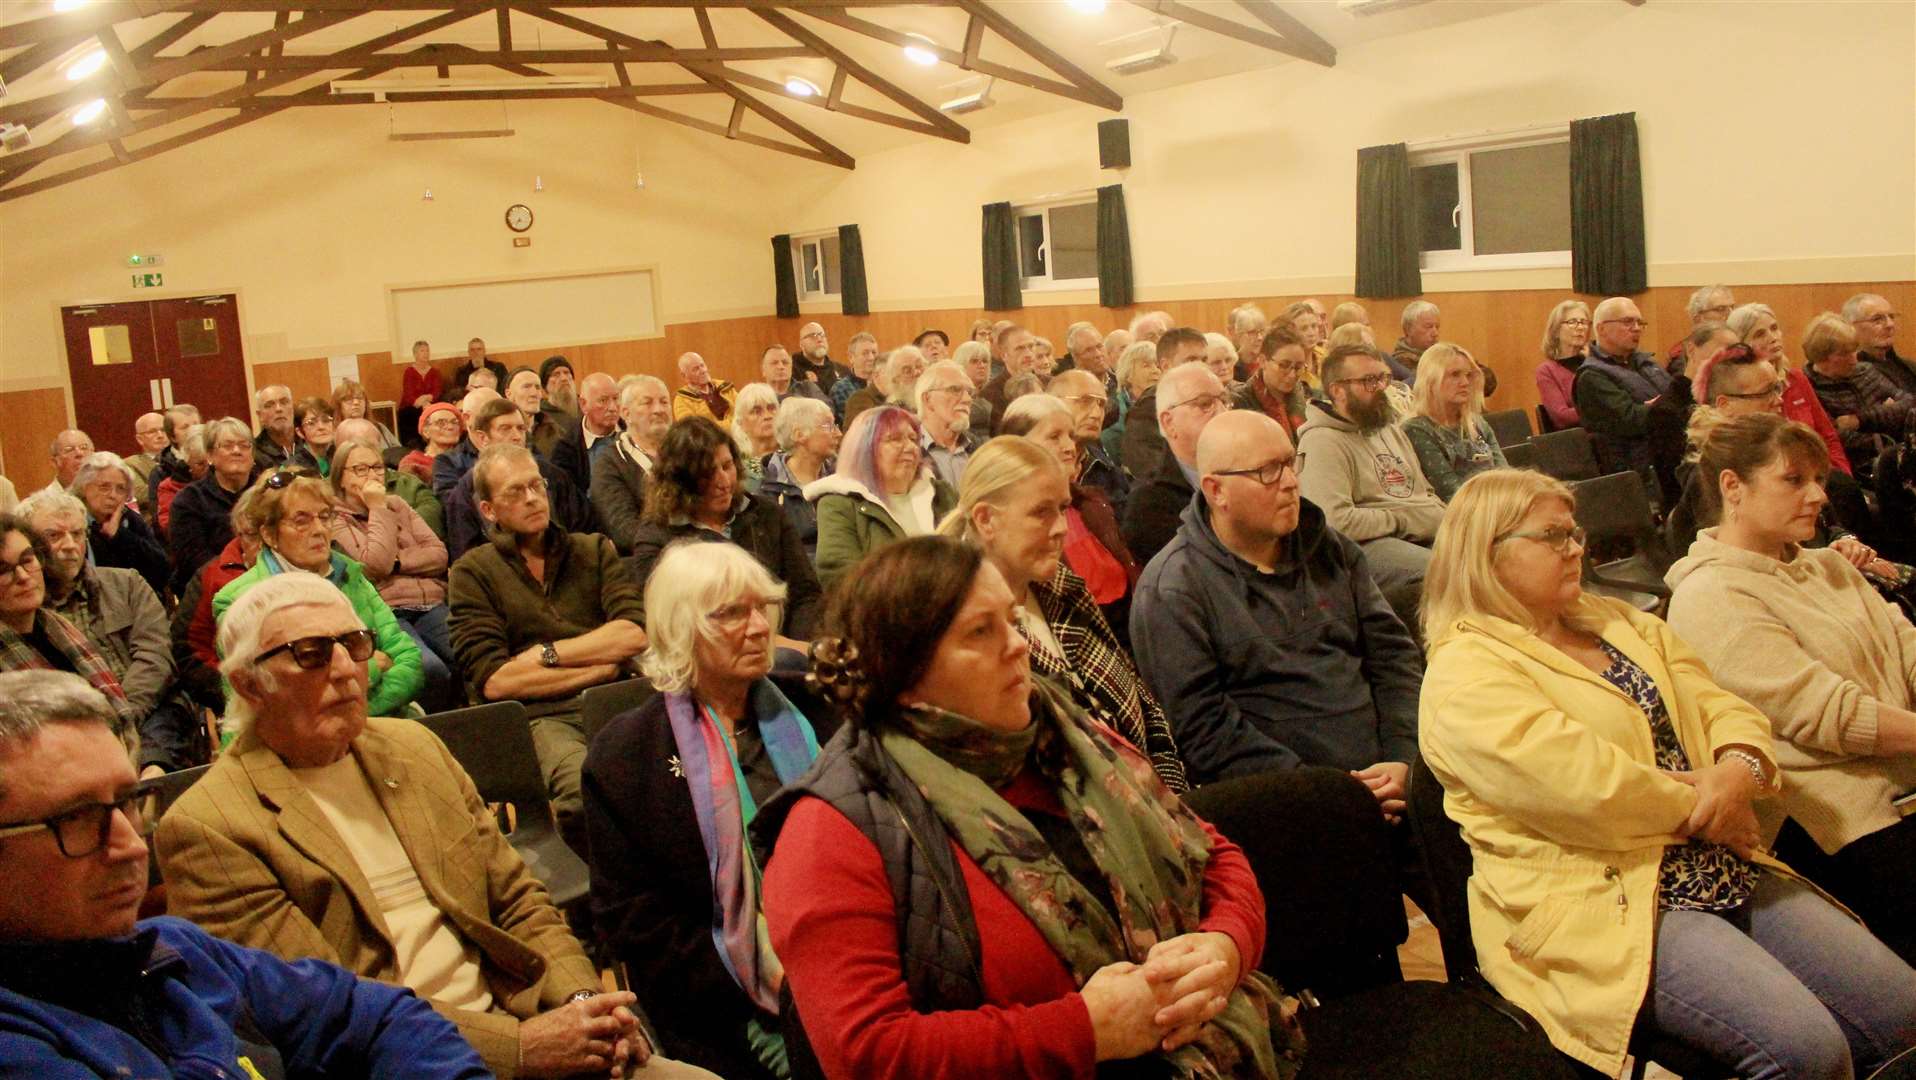 More than 100 members of the public attended a meeting in Dunbeath community hall last month on plans for siting overhead power lines through the area.